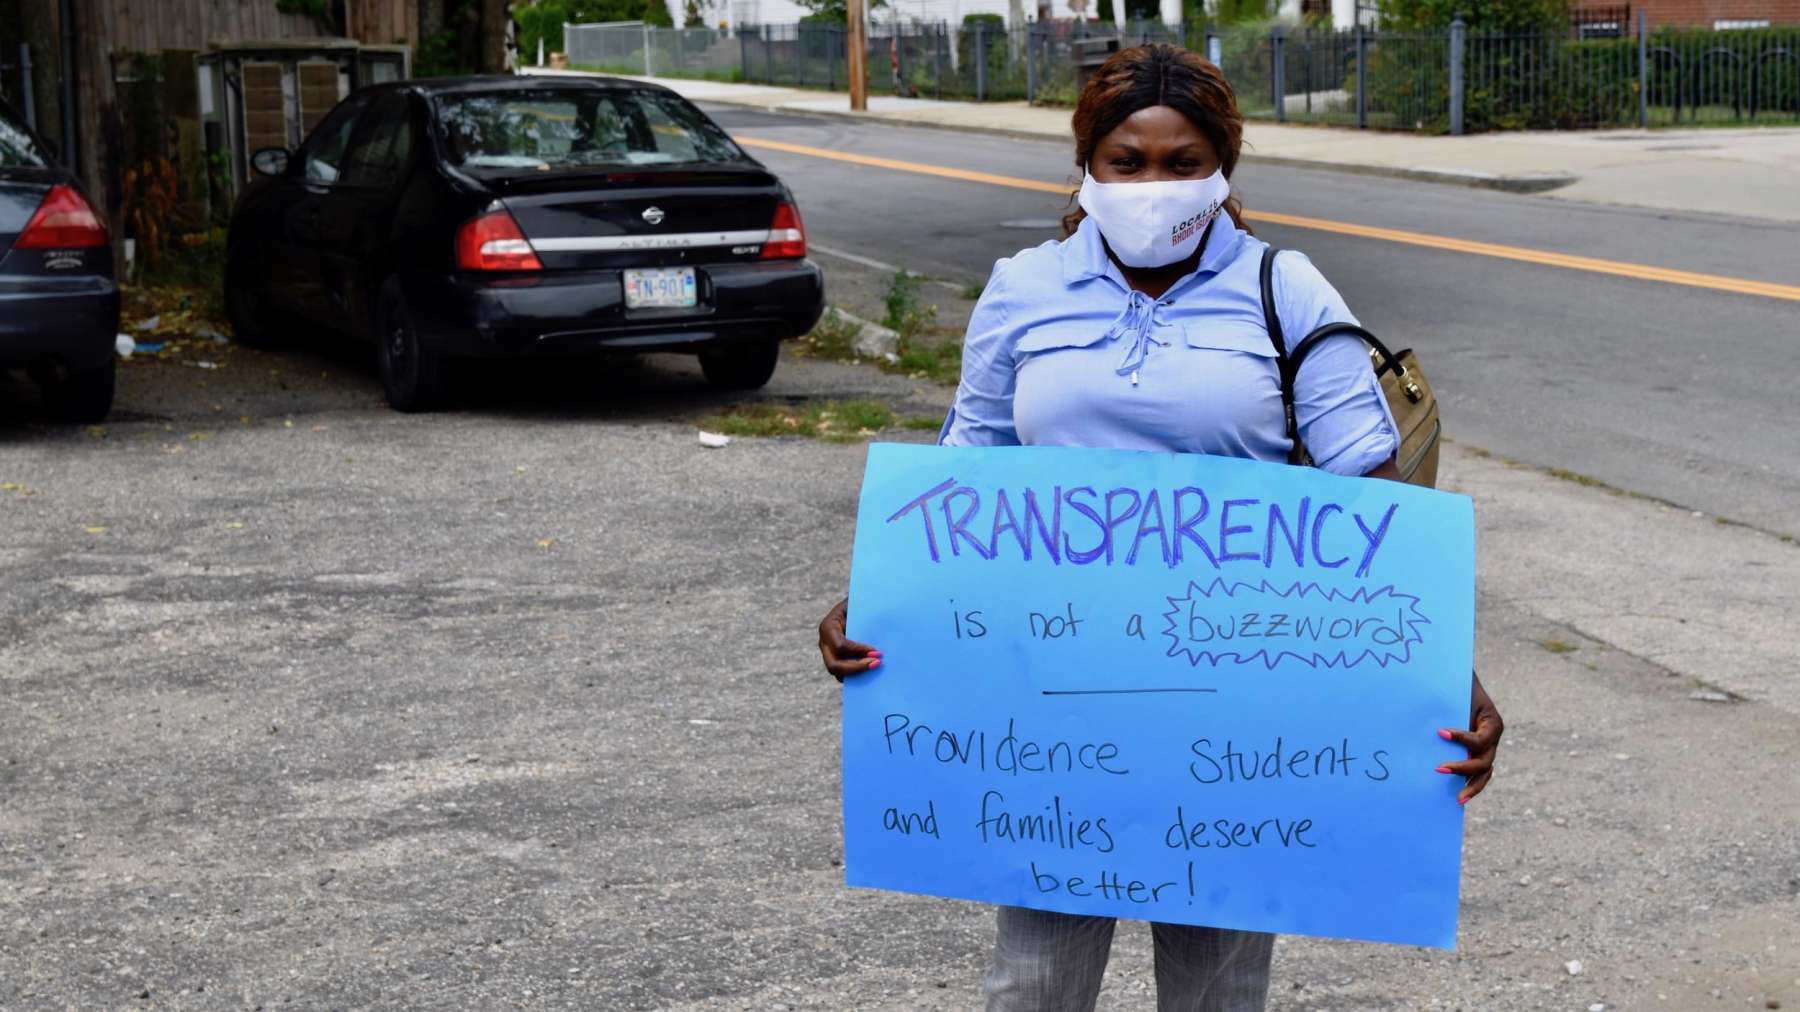 Parents demand transparency and options around school reopening